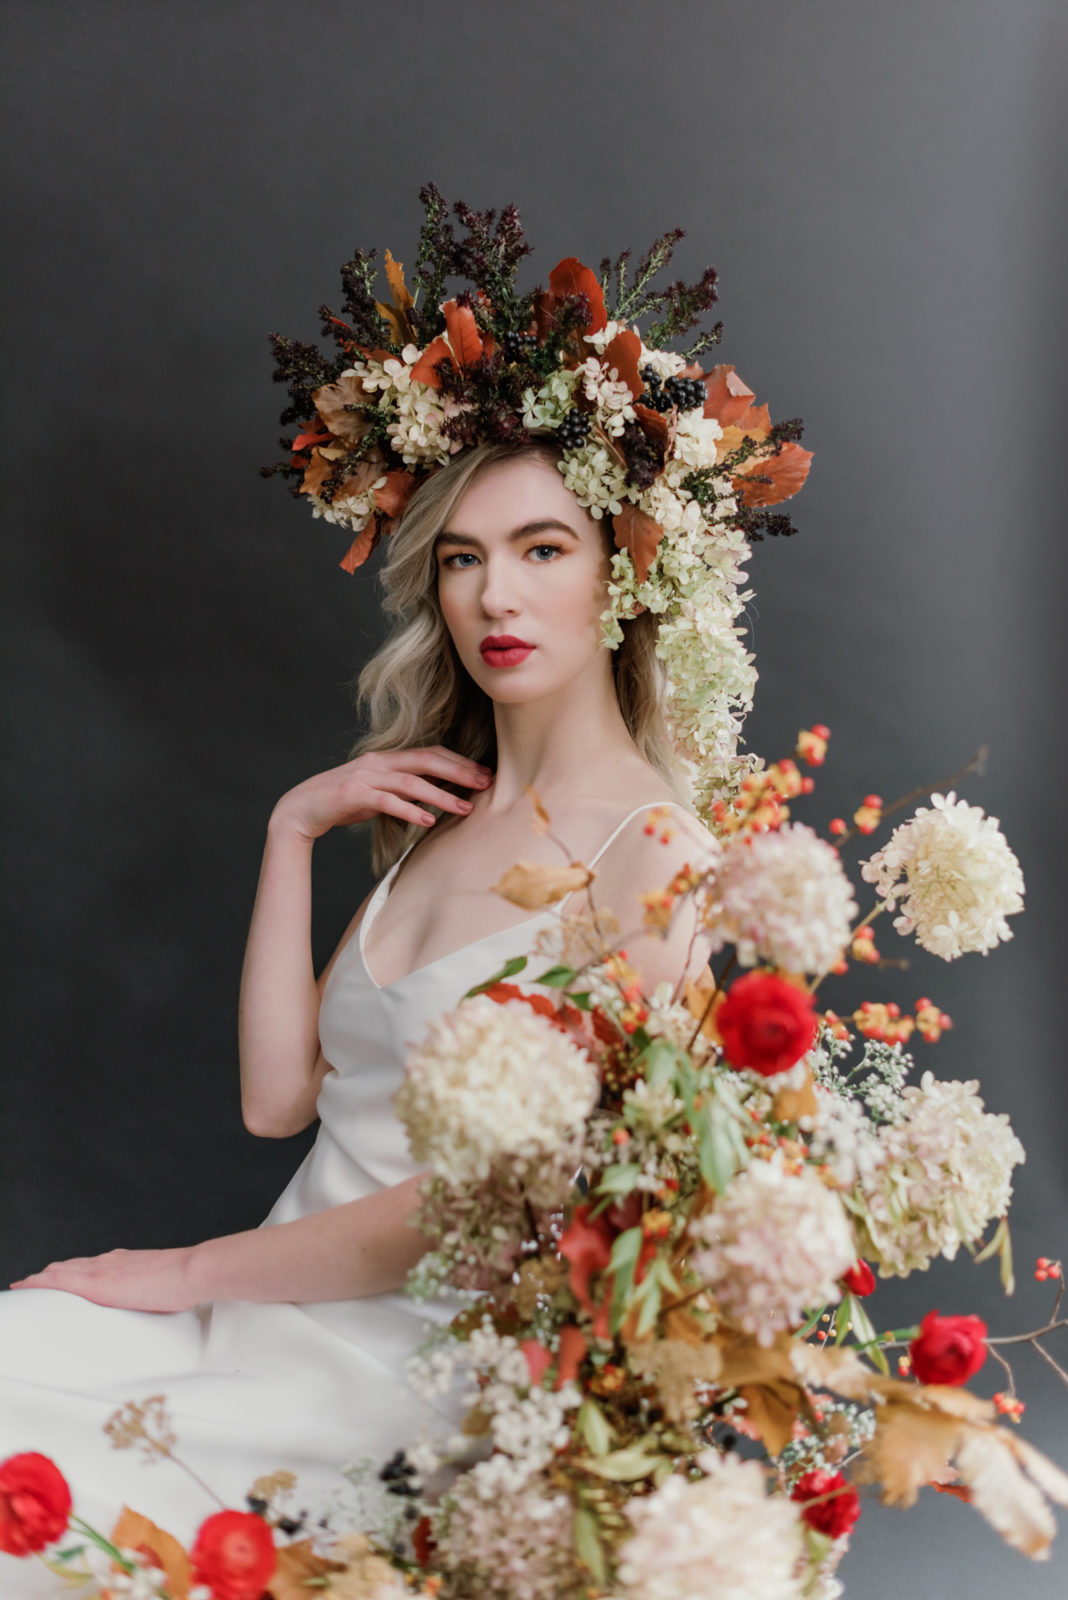 modern bridal style, autumn bridal looks, fall floral bouquet inspiration, floral wedding headband, floral wedding accents